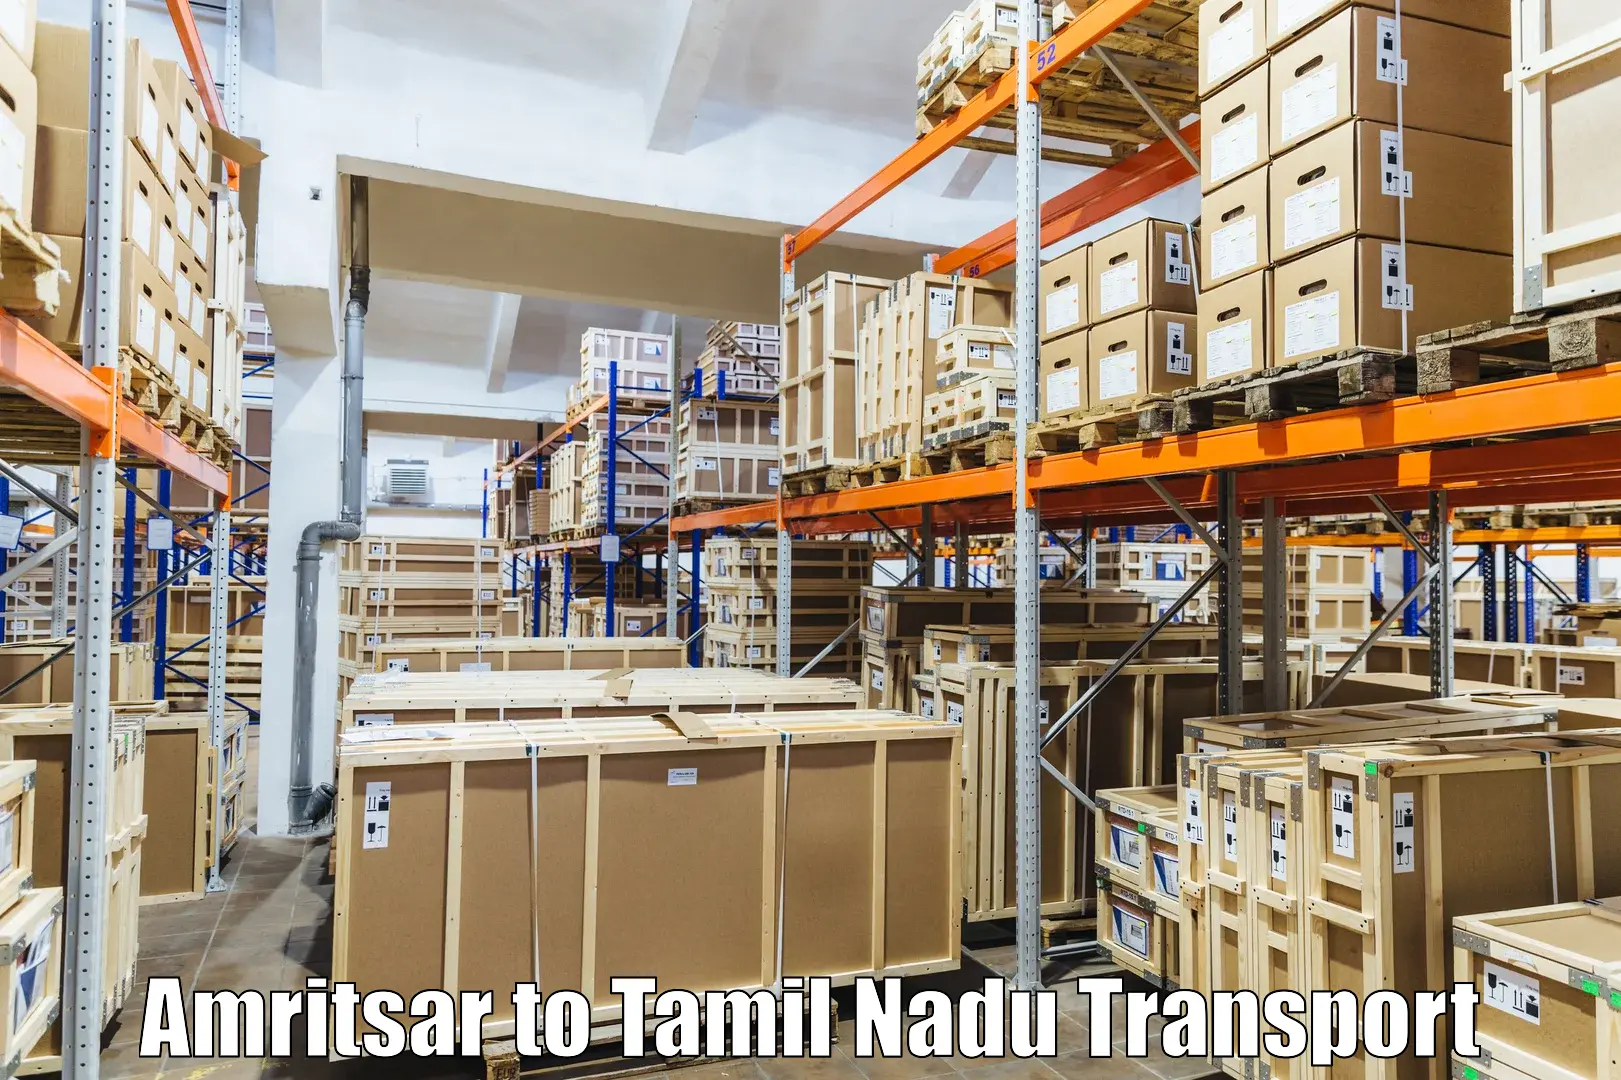 Road transport online services Amritsar to Anthiyur